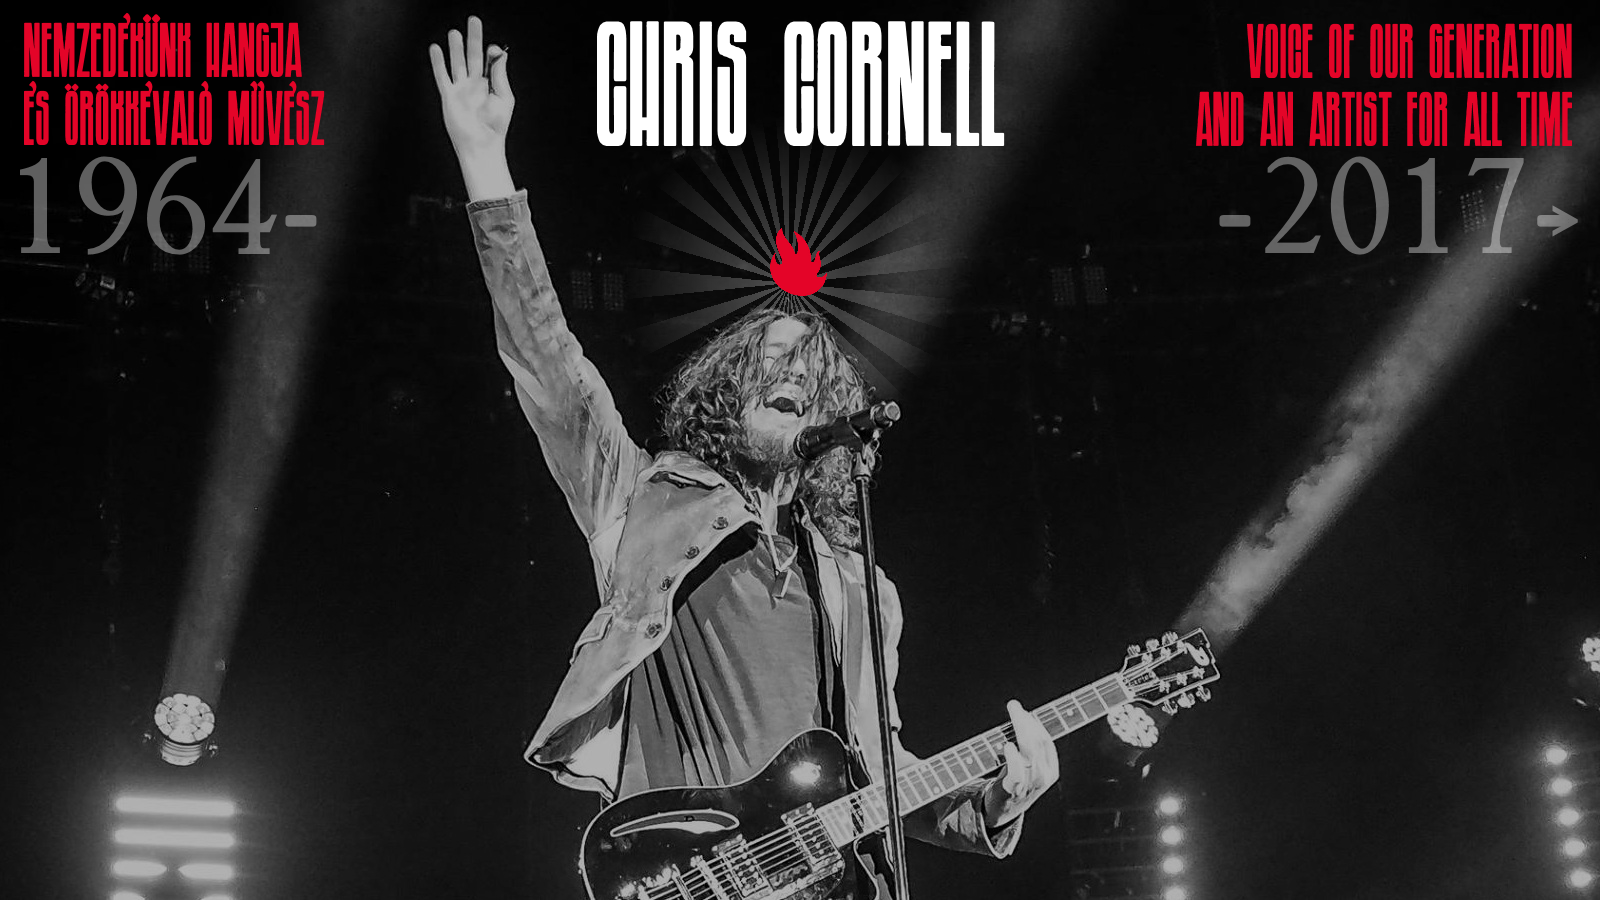 chriscornell_goodbye_png_1.png